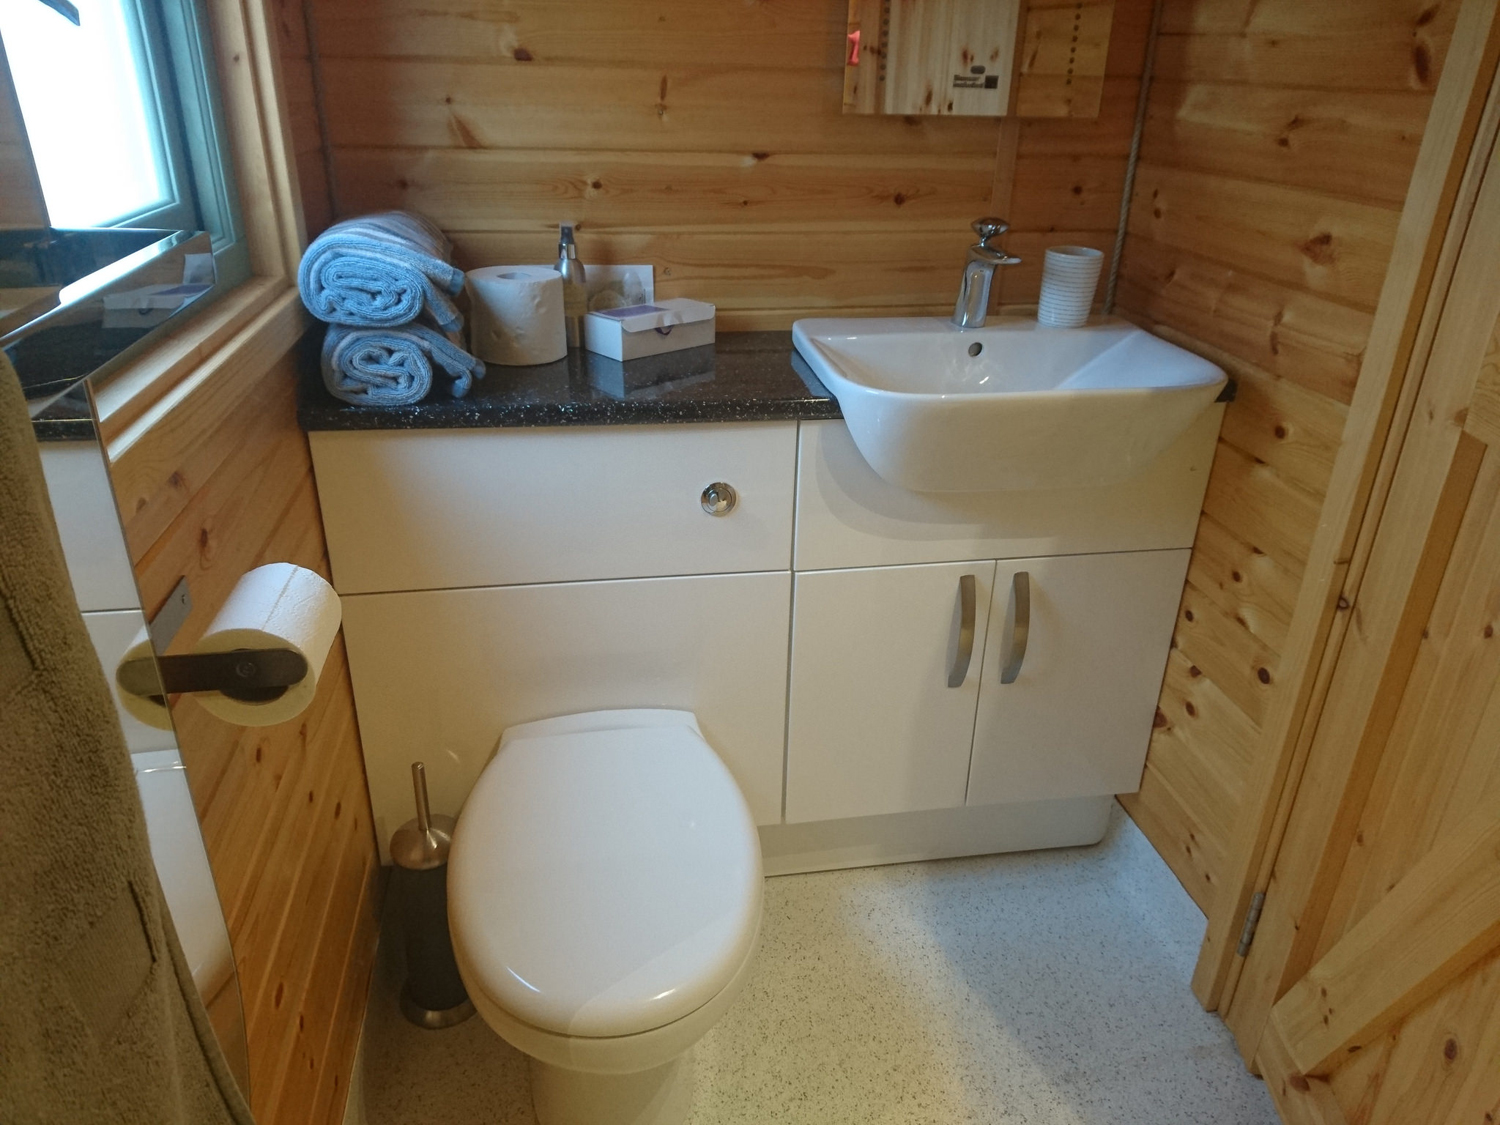 The bathroom inside the glamping pod